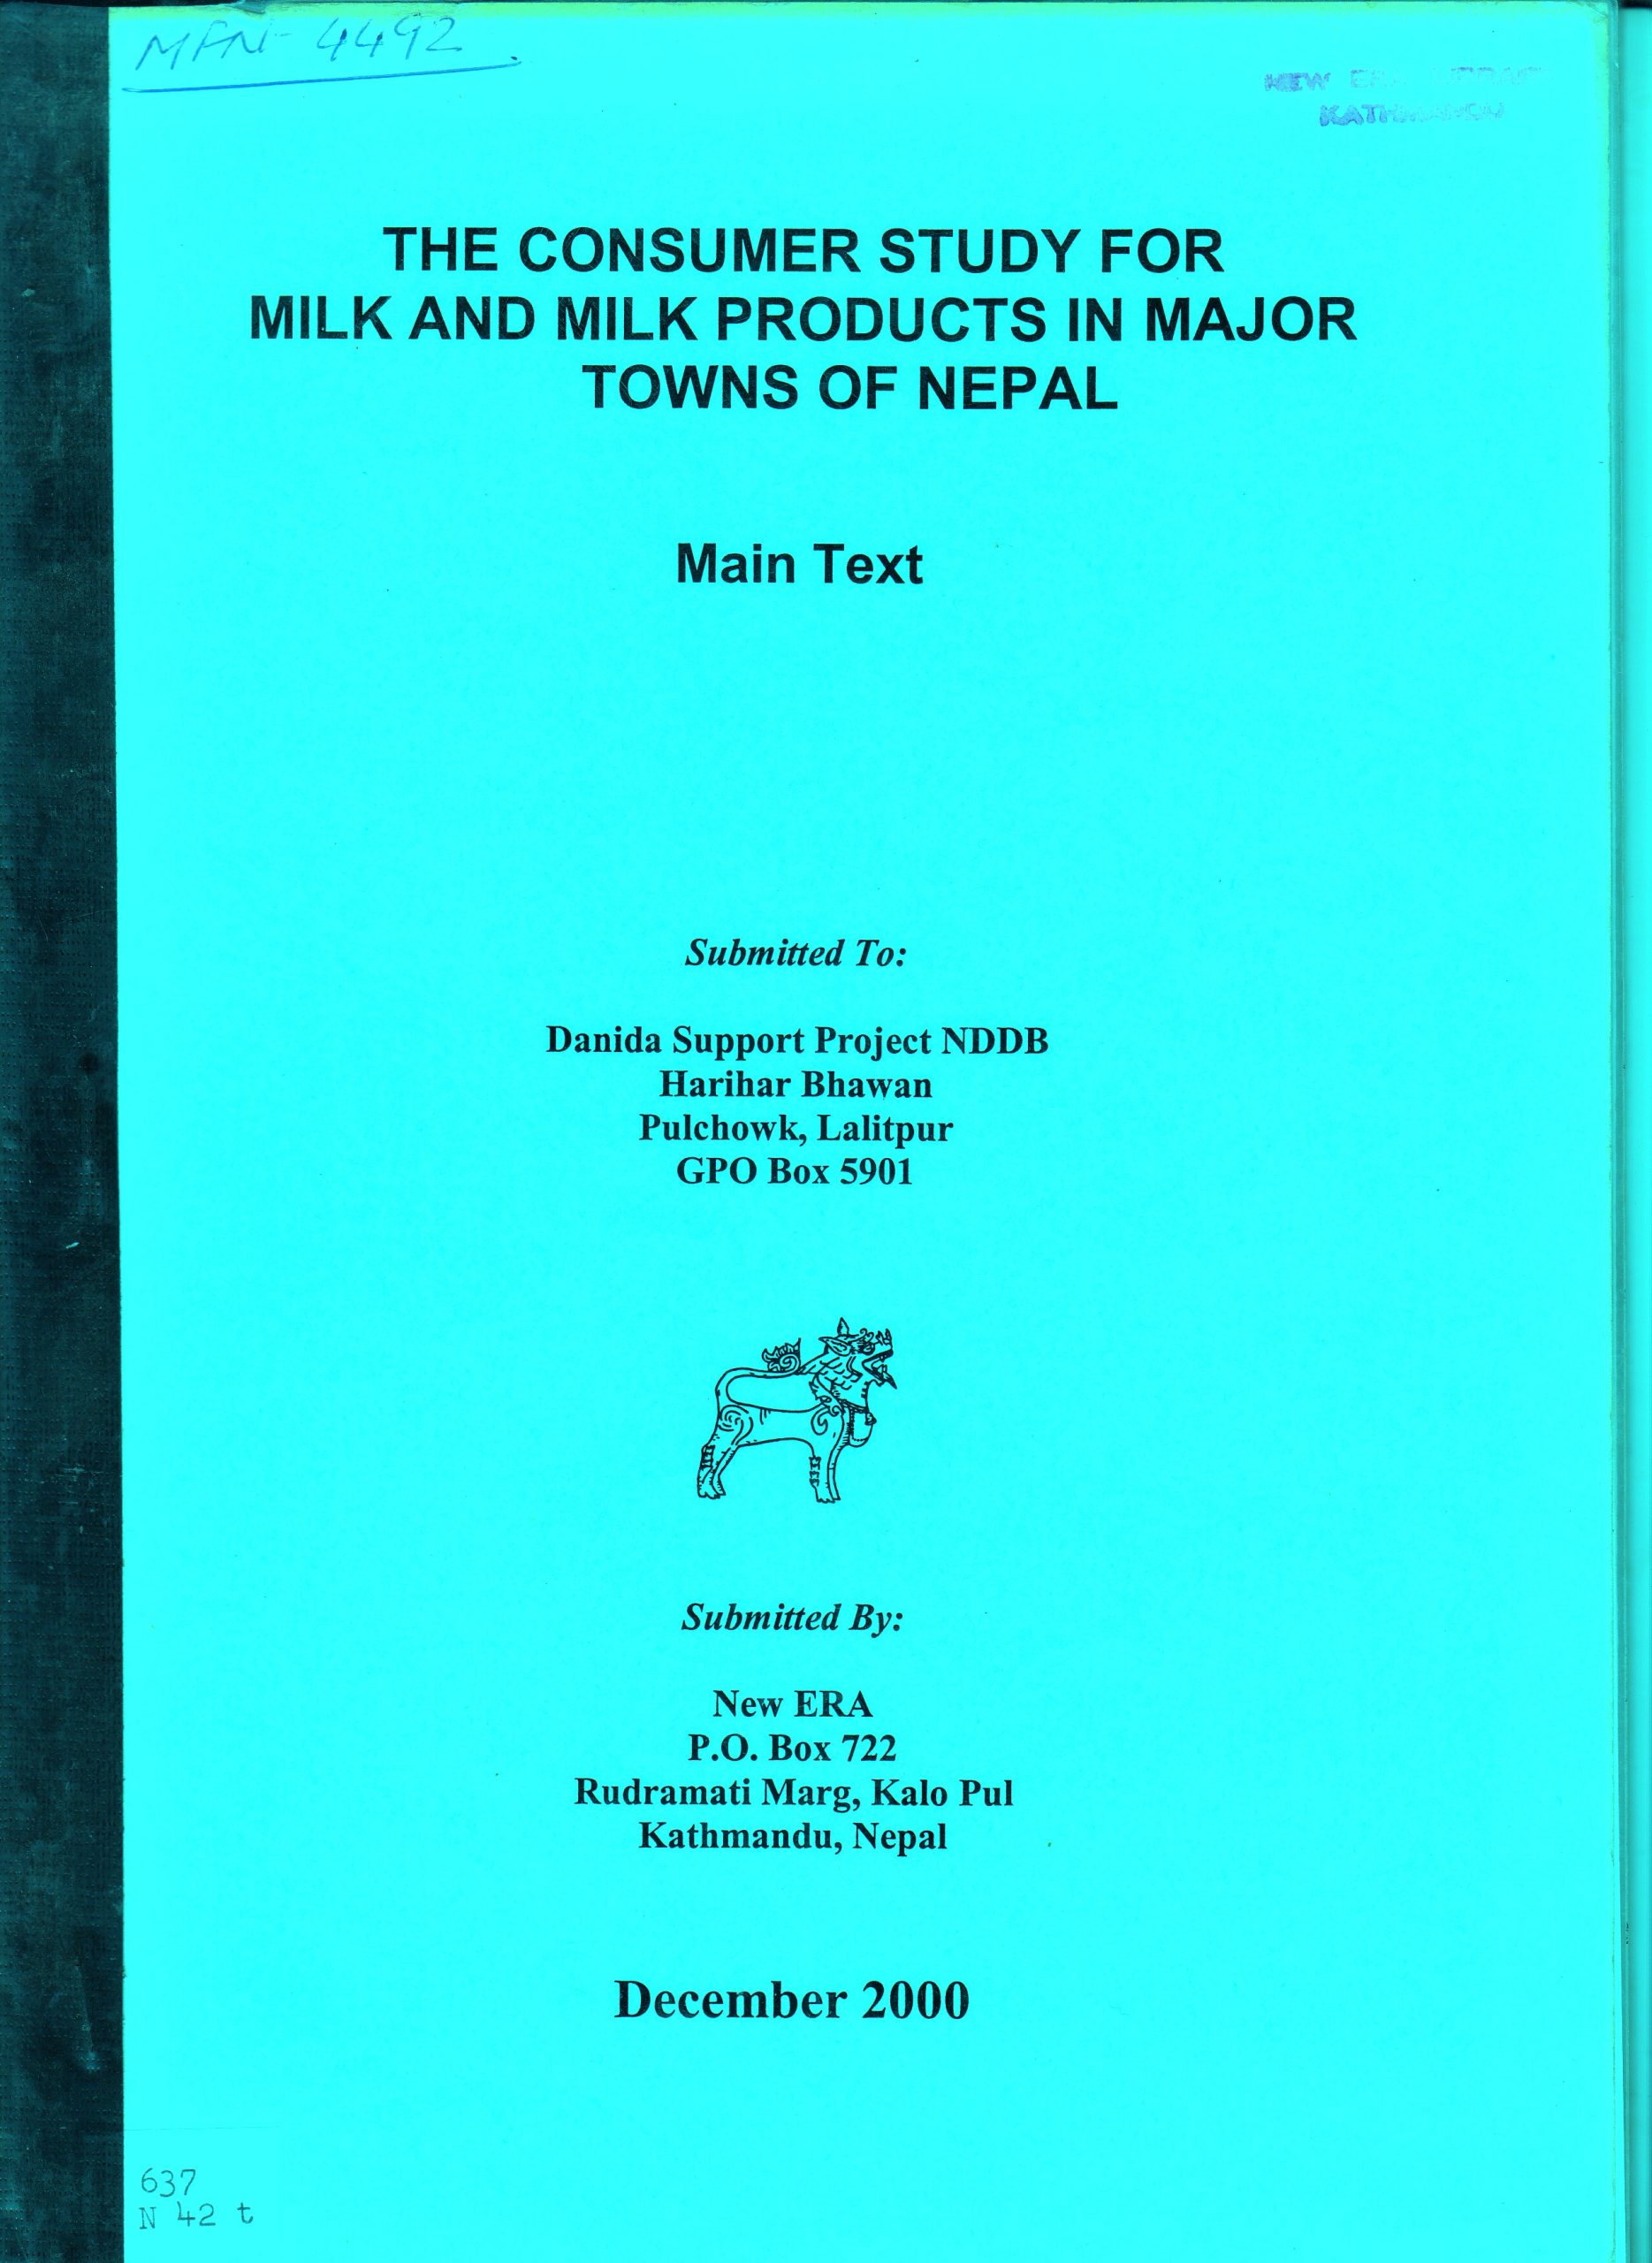 The Consumer Study for the Milk and Milk Products Market in the Major Towns of Nepal